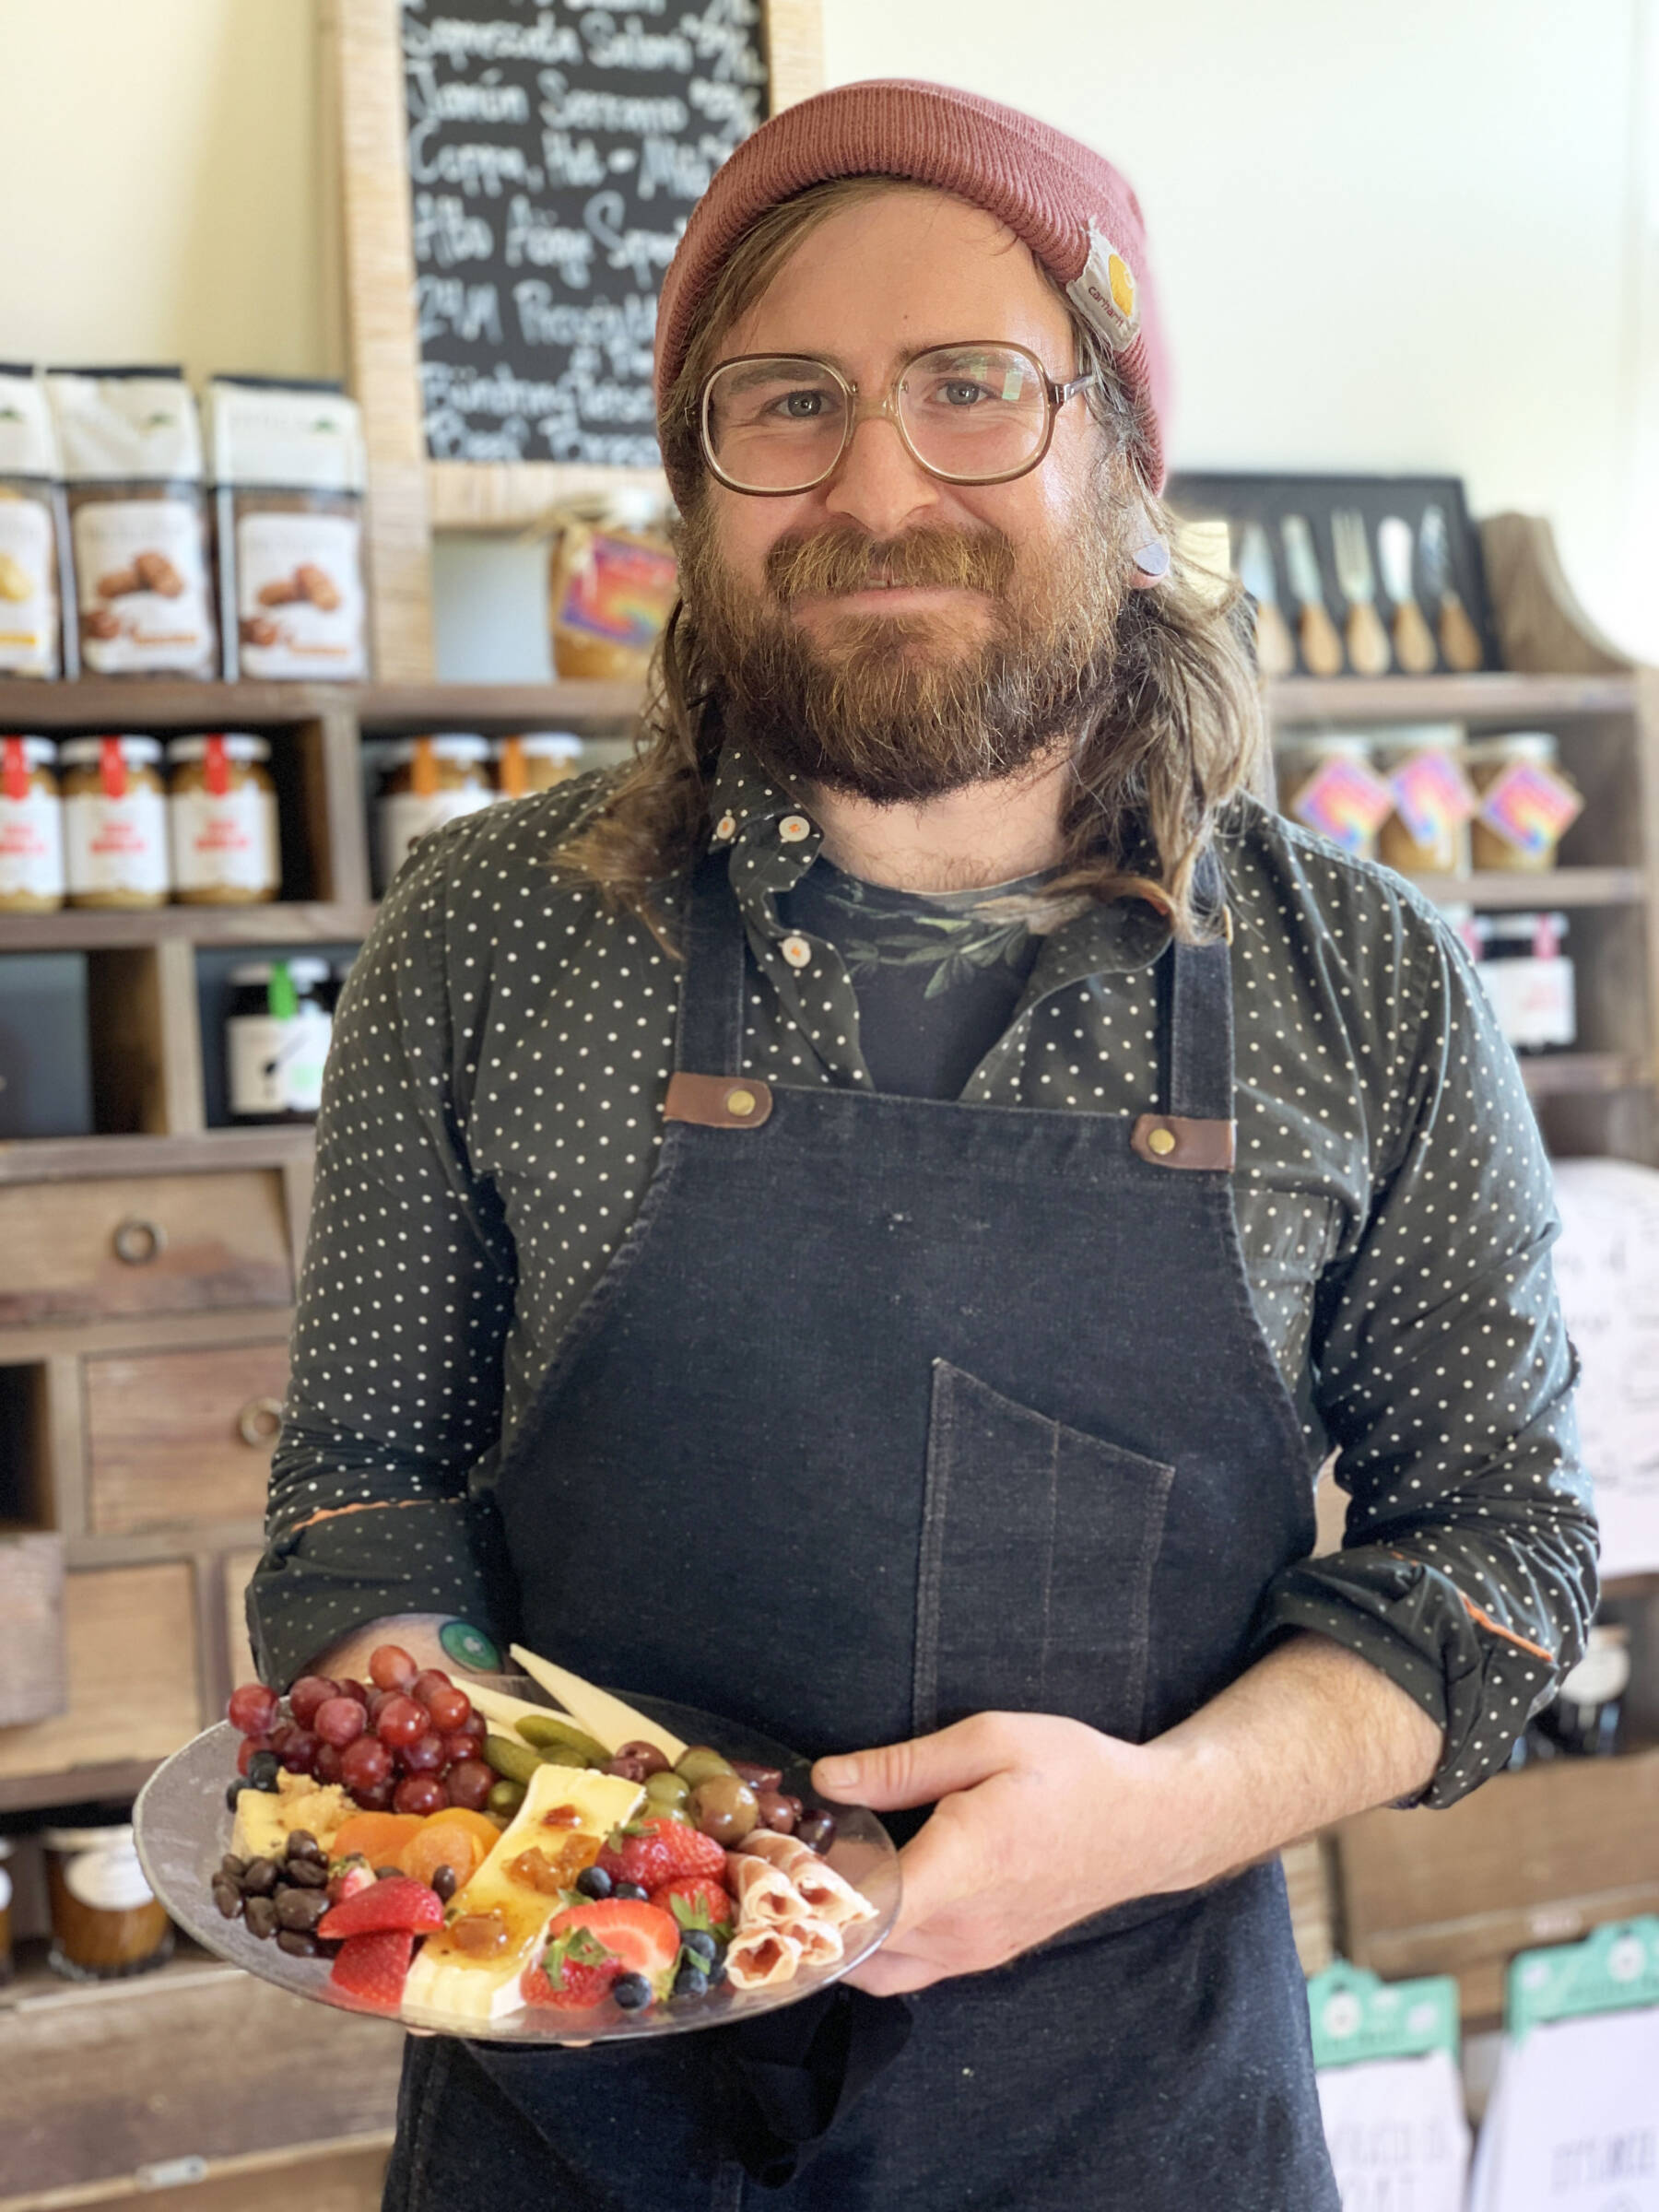 Community member Jacob Chrisman, photographed on Thursday, July 20, 2023, is the owner of Alasandro’s Market, a gourmet market specializing in imported cheeses, dry-cured meats and charcuterie platters, that opened on Heath Street in June. Photo by Christina Whiting